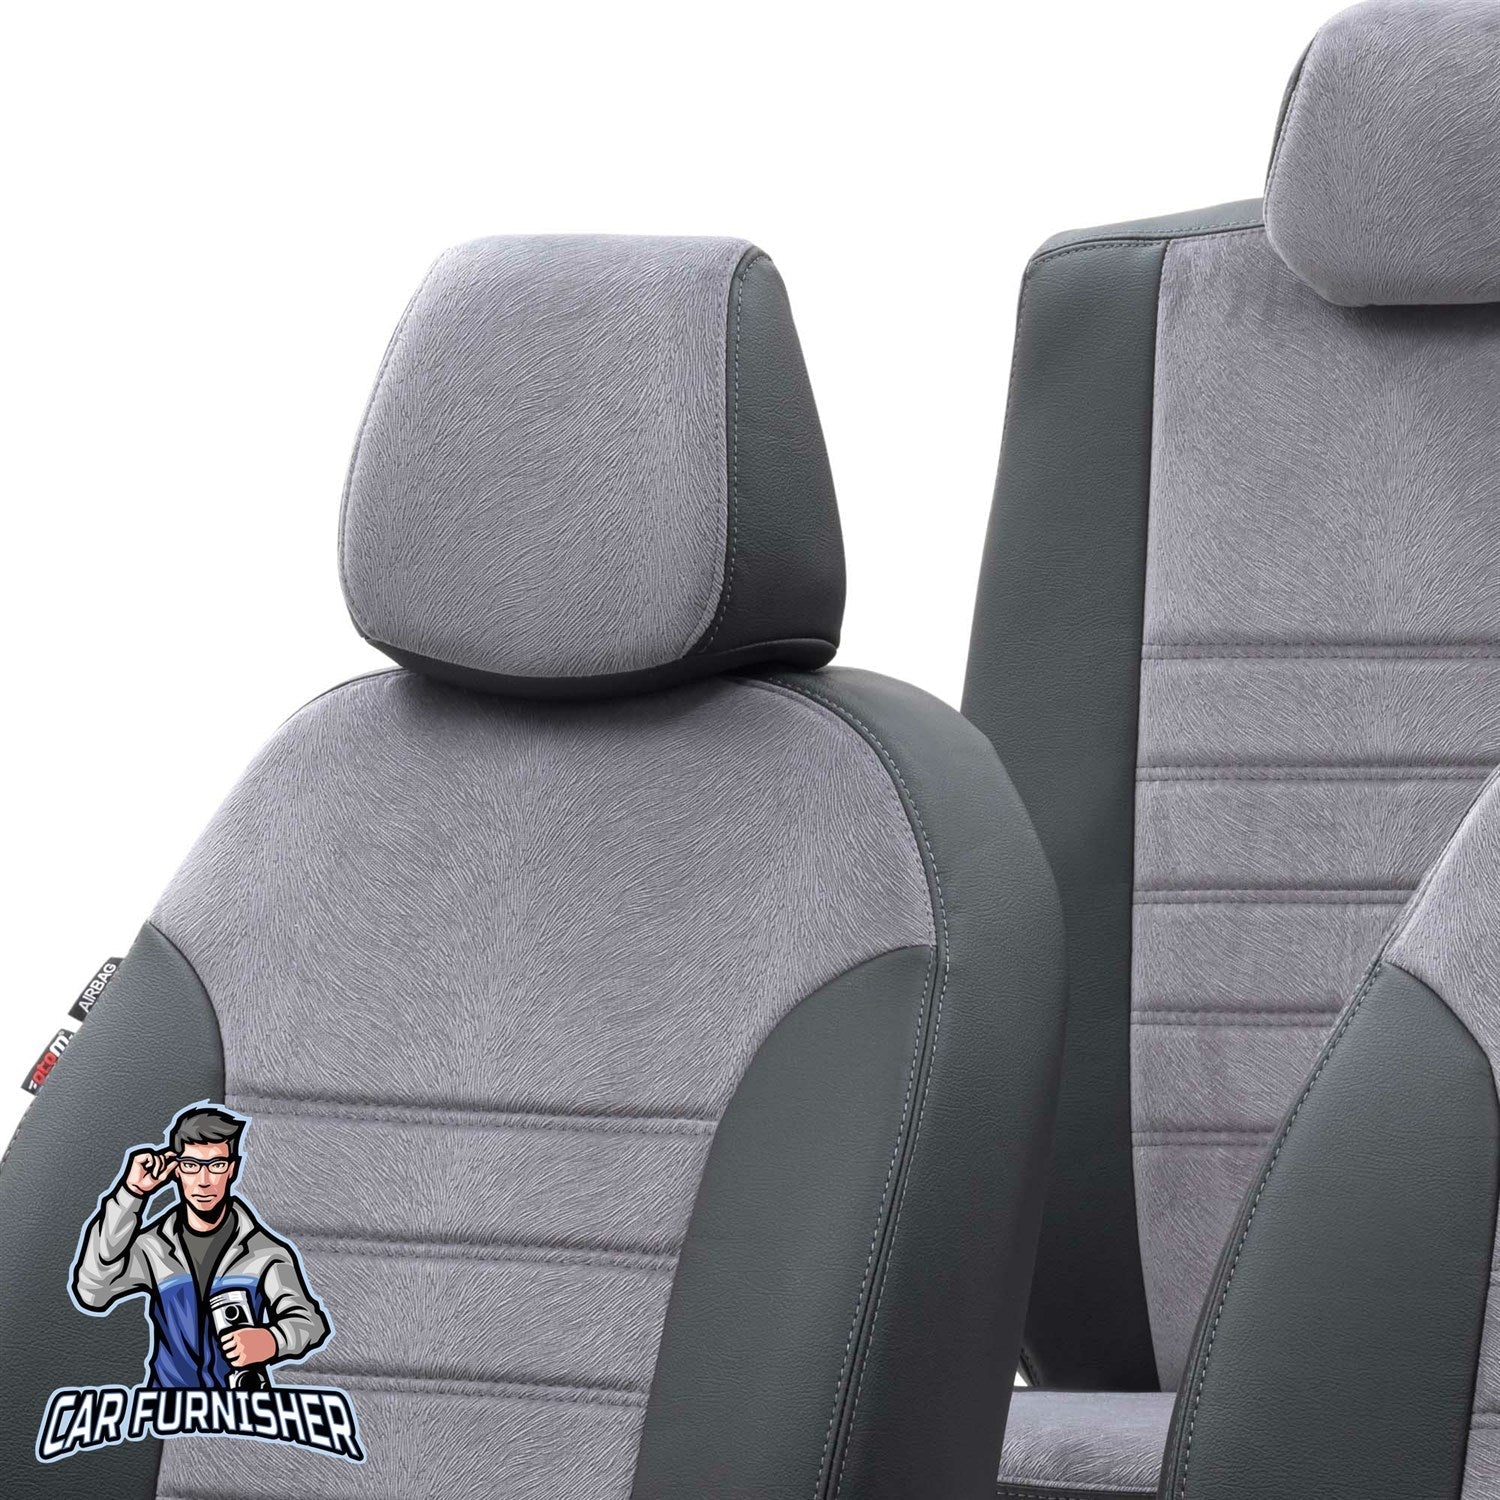 Chevrolet Aveo Car Seat Cover 2003-2023 T200/T250/T300 London Smoked Black Full Set (5 Seats + Handrest) Leather & Fabric